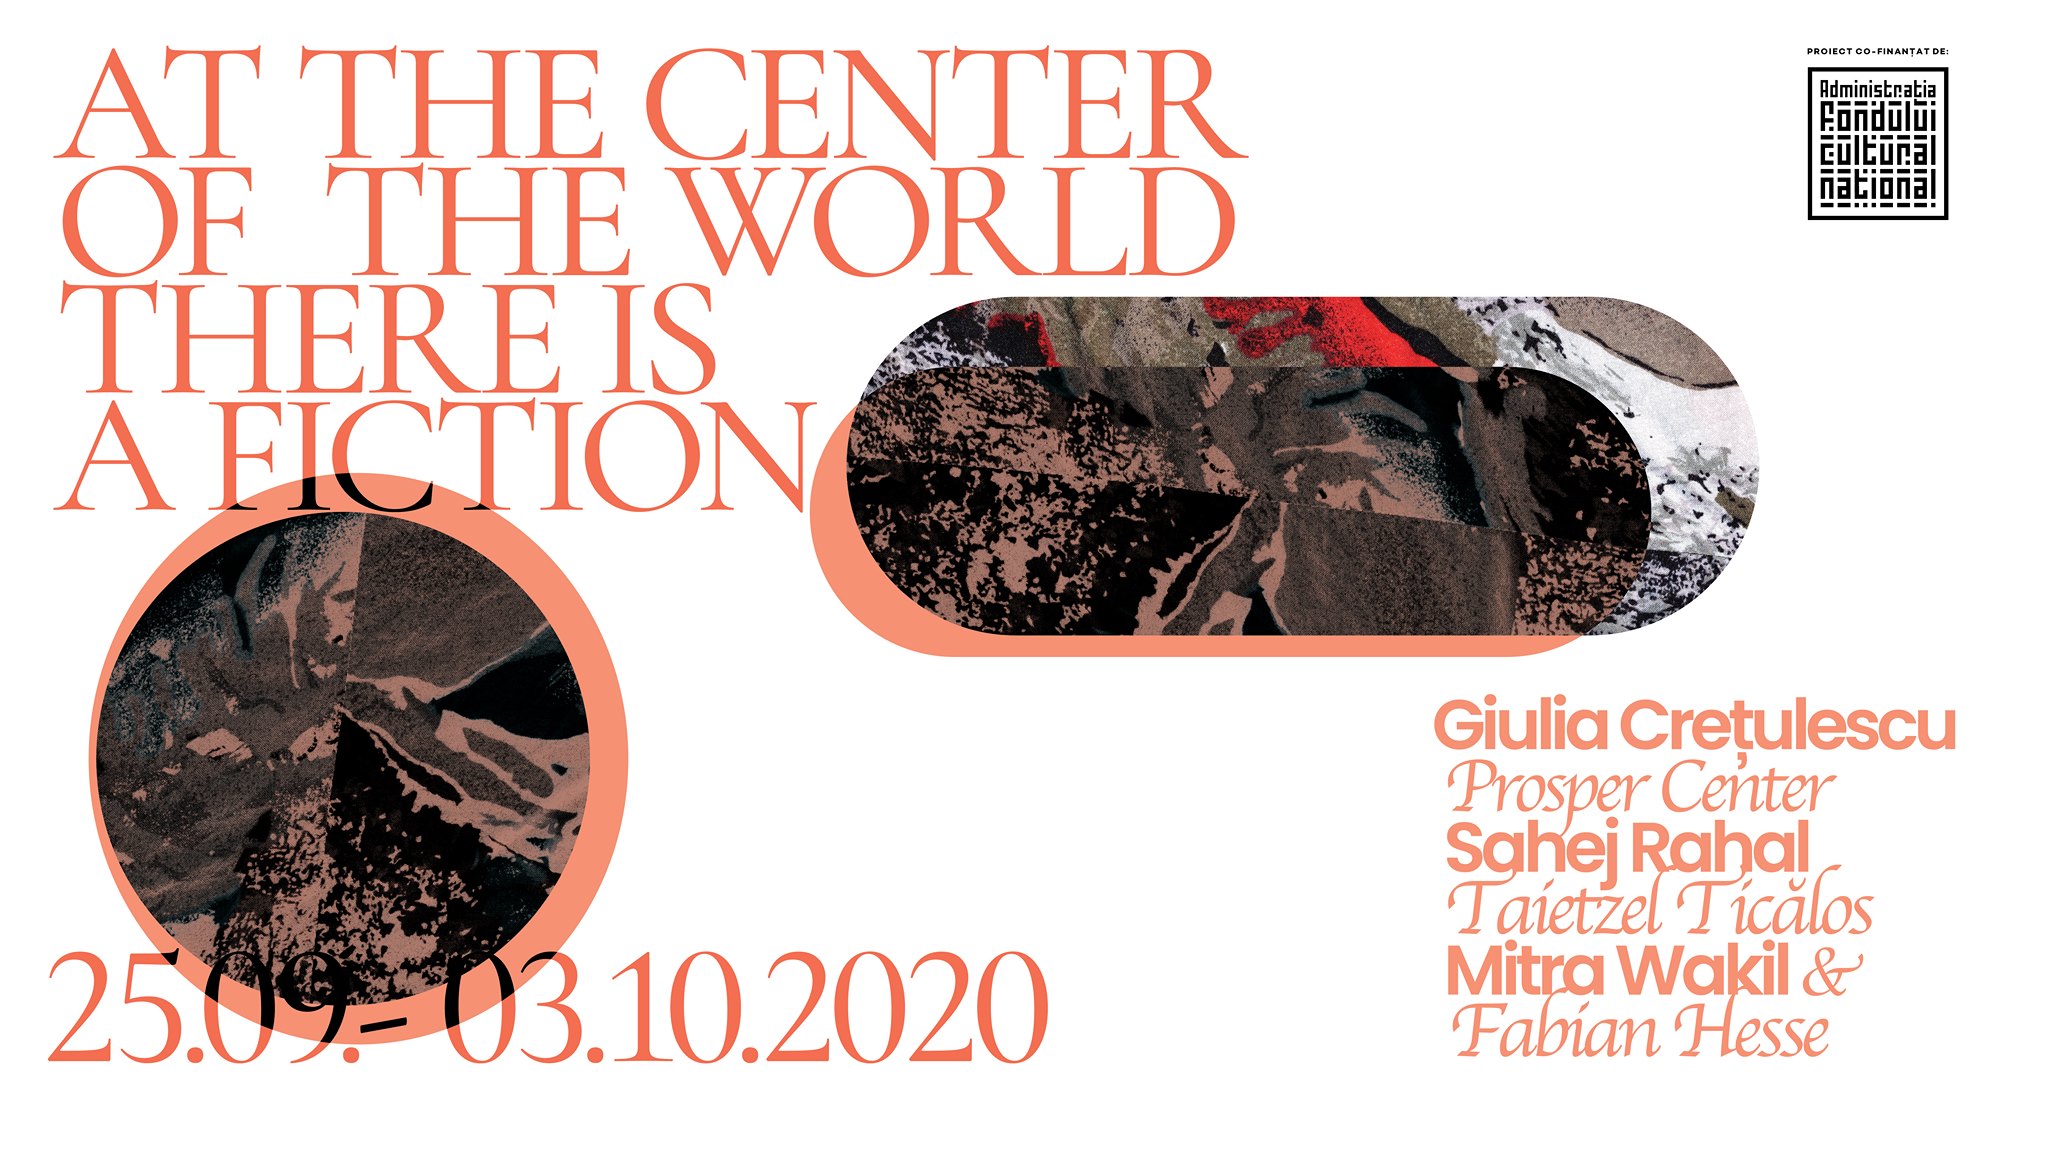 At The Center of The World There is Fiction - Aici Acolo Pop up Gallery